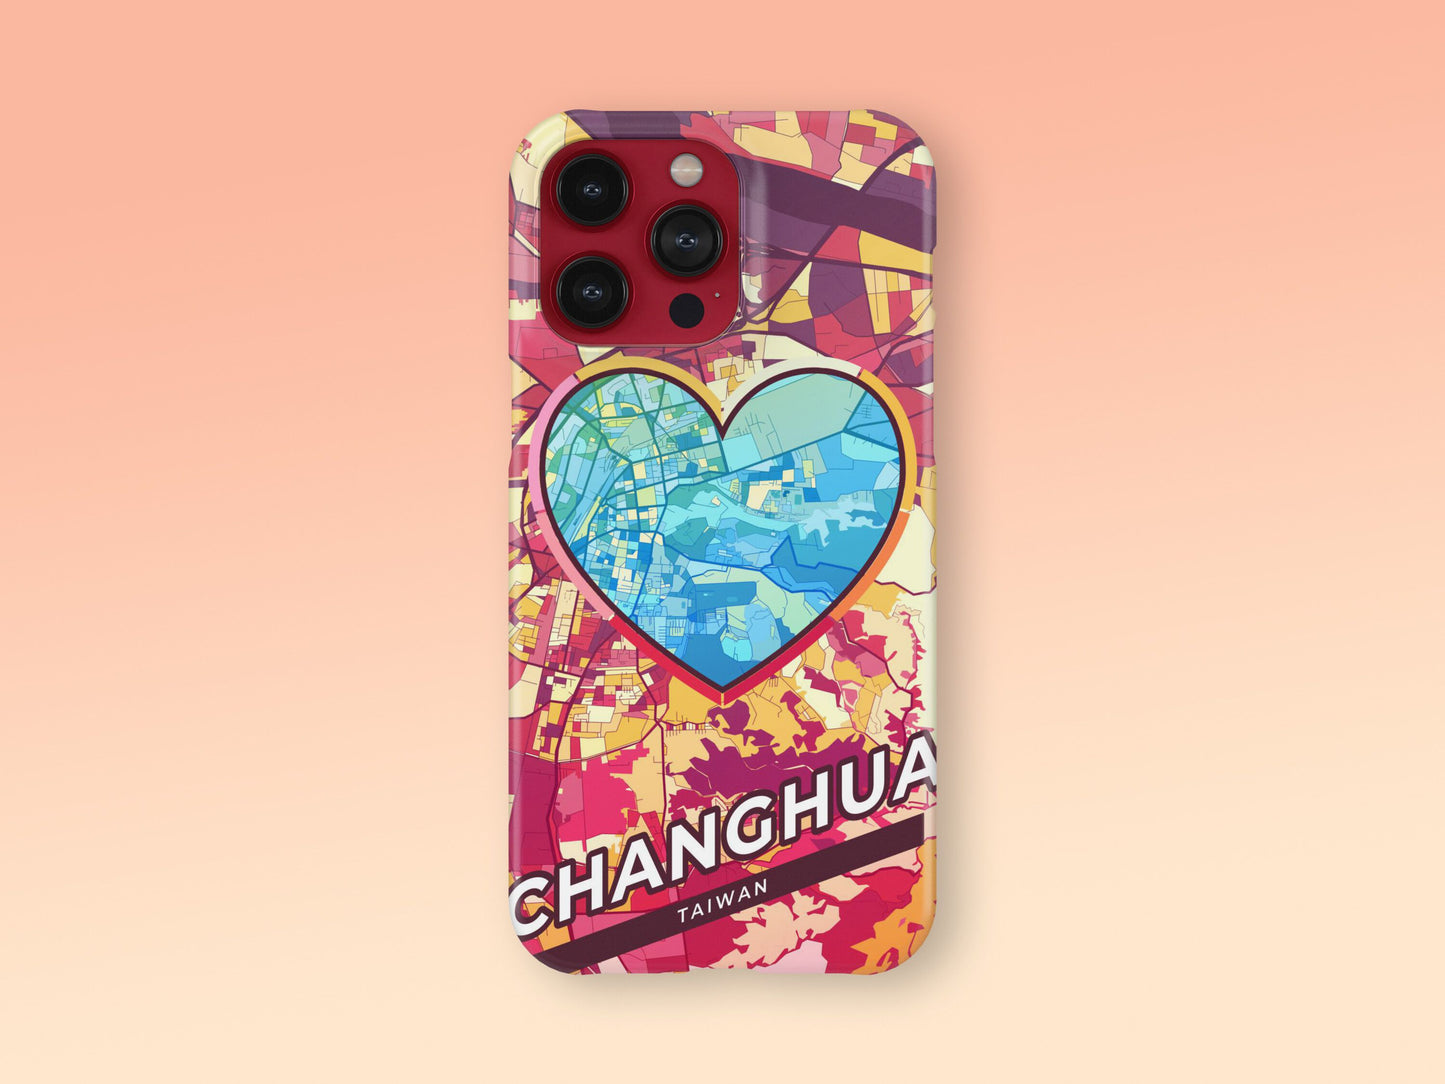 Changhua Taiwan slim phone case with colorful icon. Birthday, wedding or housewarming gift. Couple match cases. 2